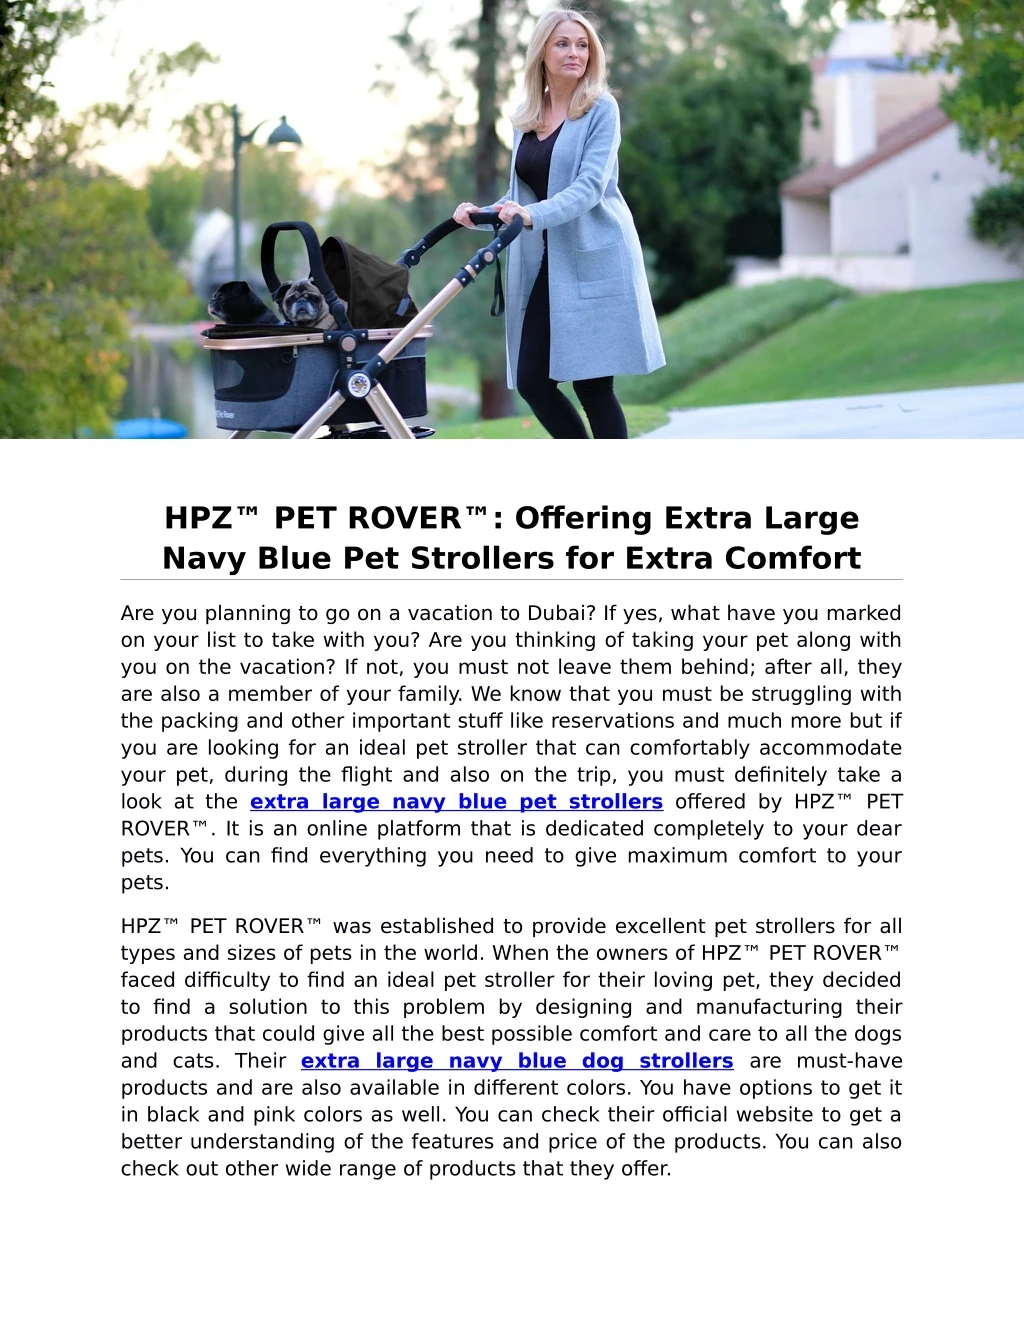 hpz pet rover offering extra large navy blue